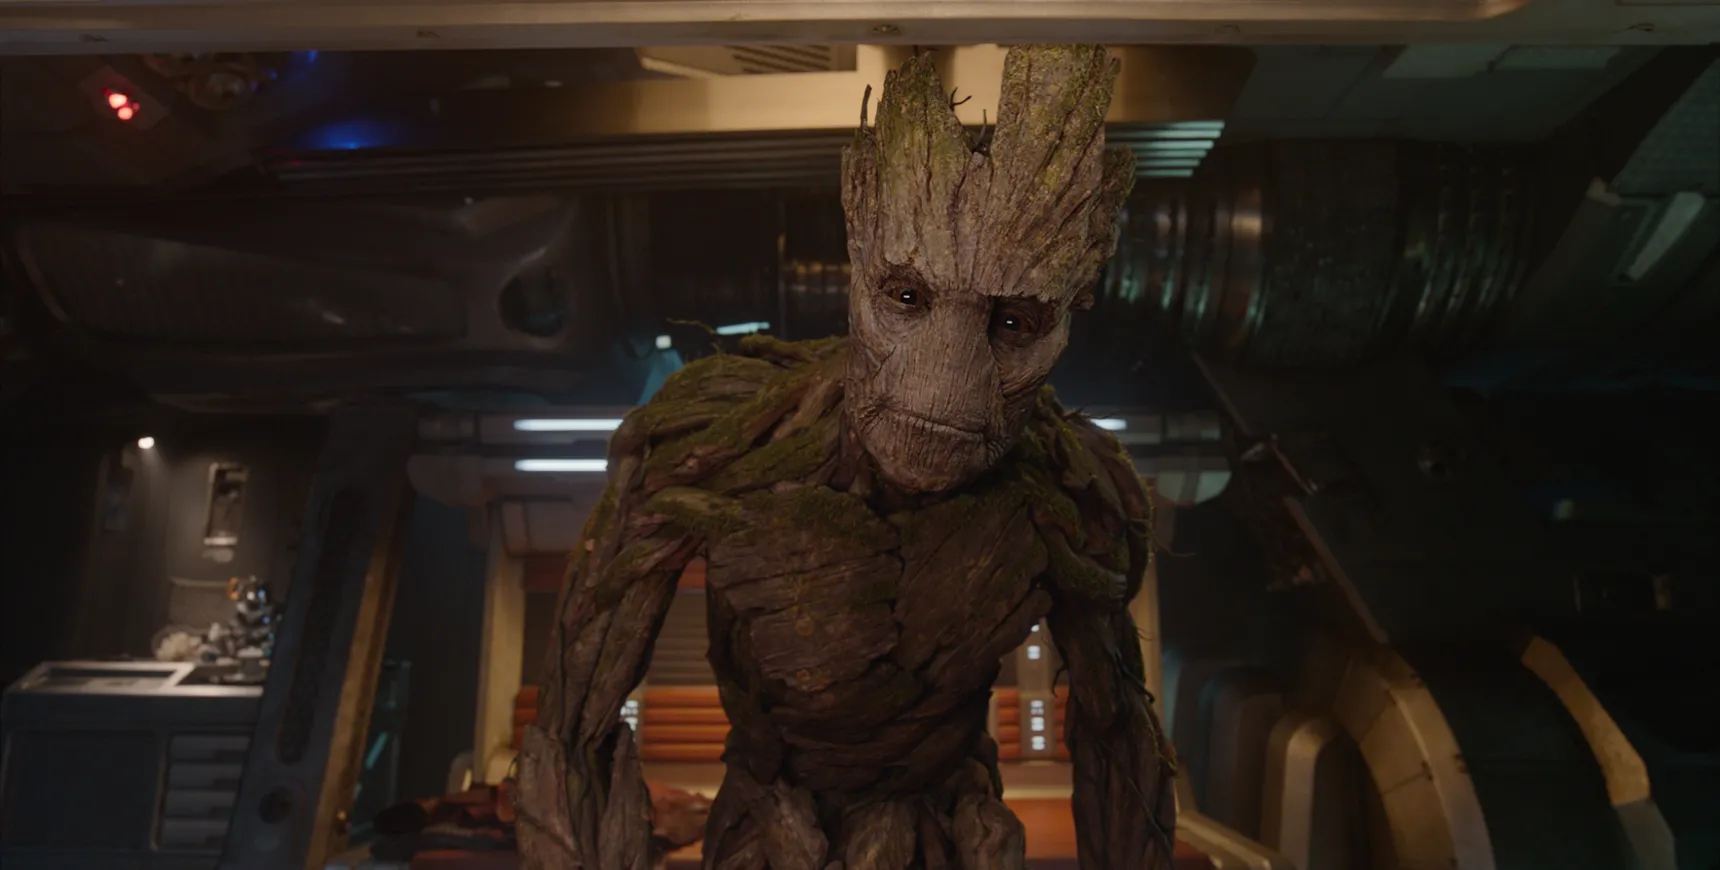 THE GUARDIANS OF THE GALAXY HOLIDAY SPECIAL: DECEMBER 2022